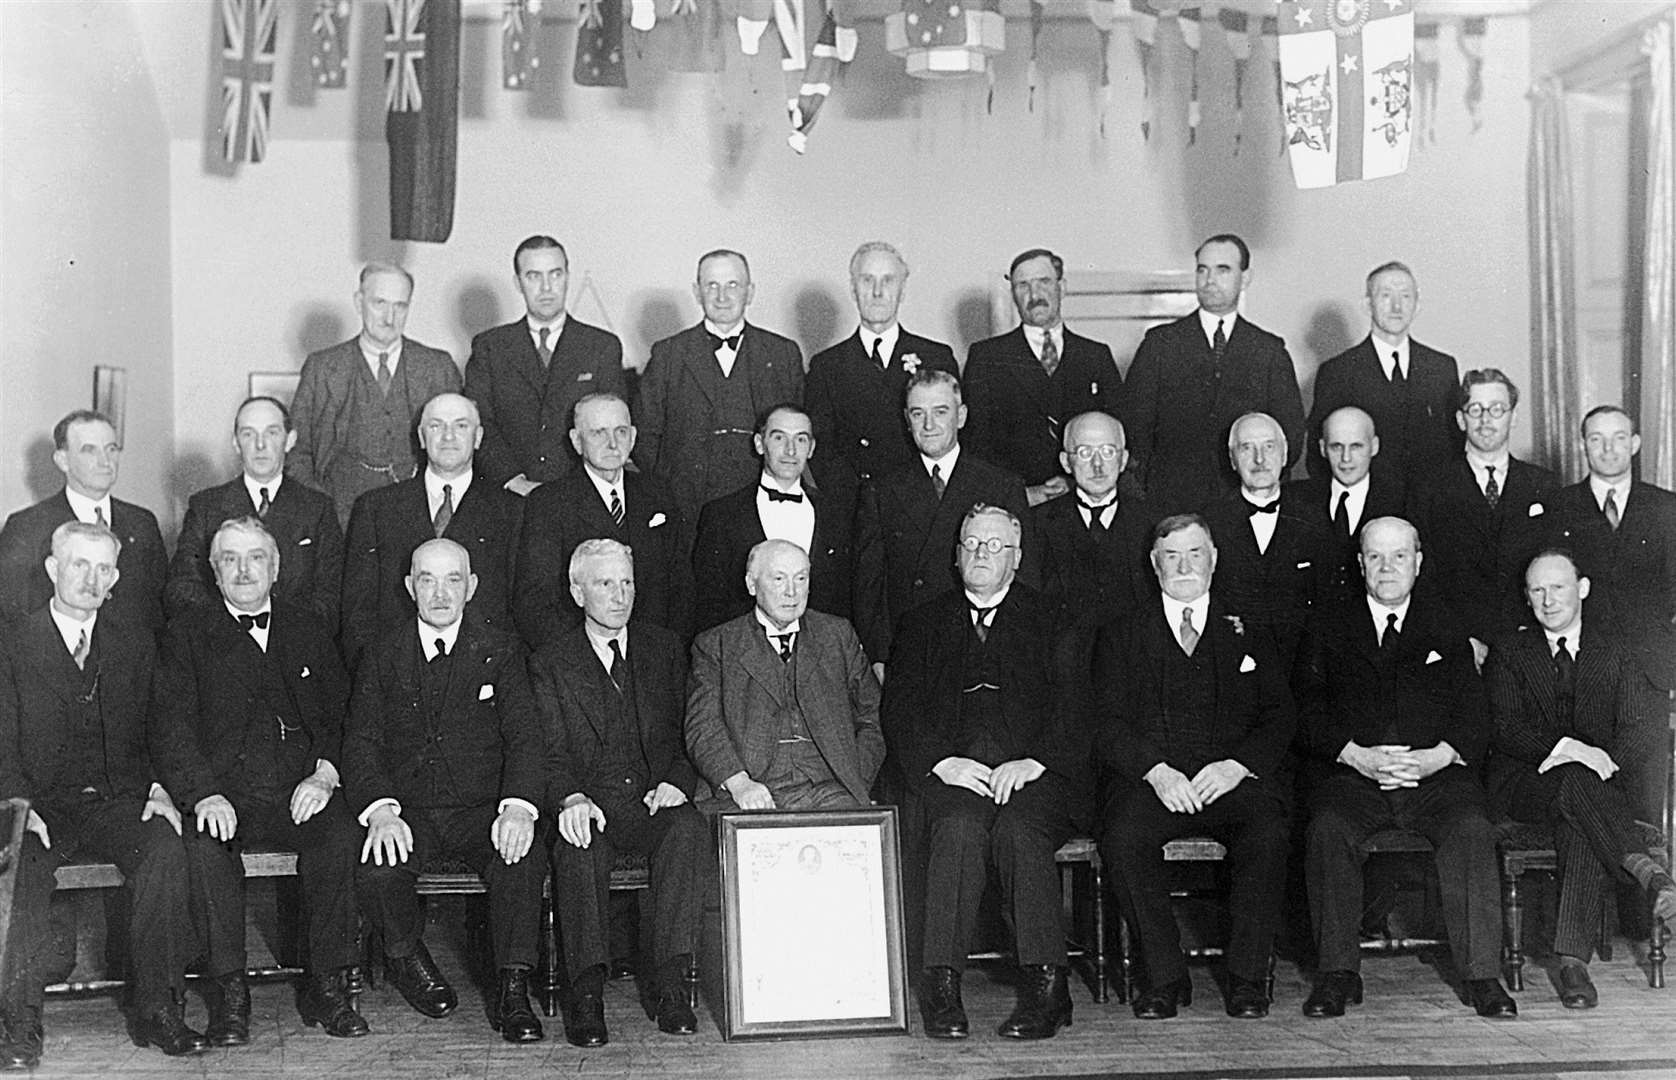 Daniel Wares Georgeson (seated in front, behind the framed picture), who founded the Wick legal firm D W Georgeson and Son in 1887, at a gathering with other pillars of the community.